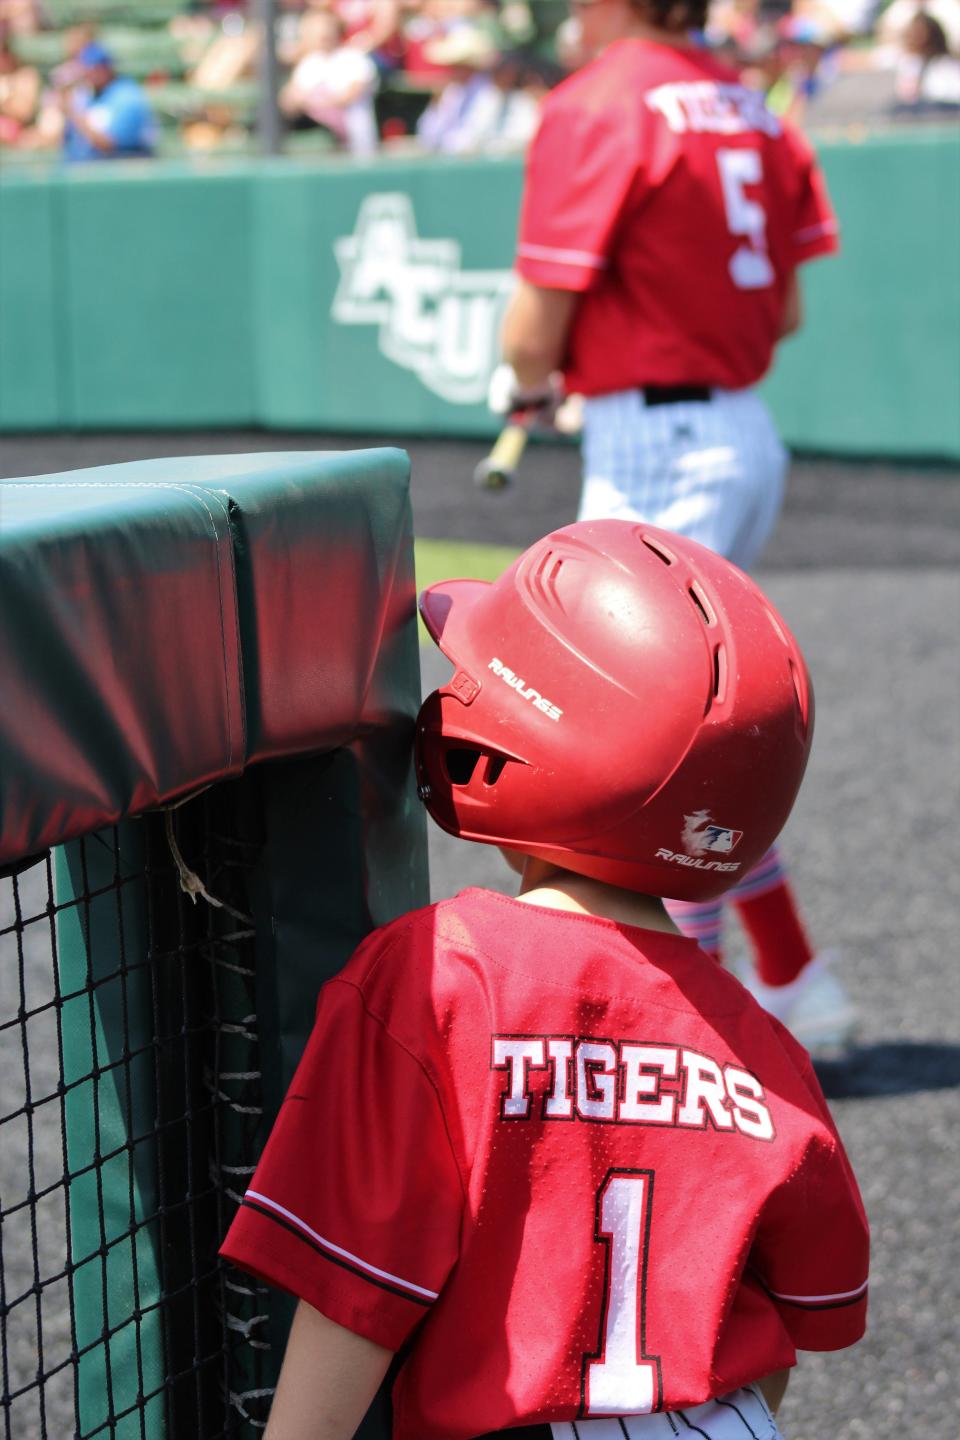 Baylor Nichols, the son of Anson coach Scotty Nichols, watches the game from behind the protective barrier in front of the Tigers' dugout Saturday. Nichols and his older brother Easton were ball boys for the team.